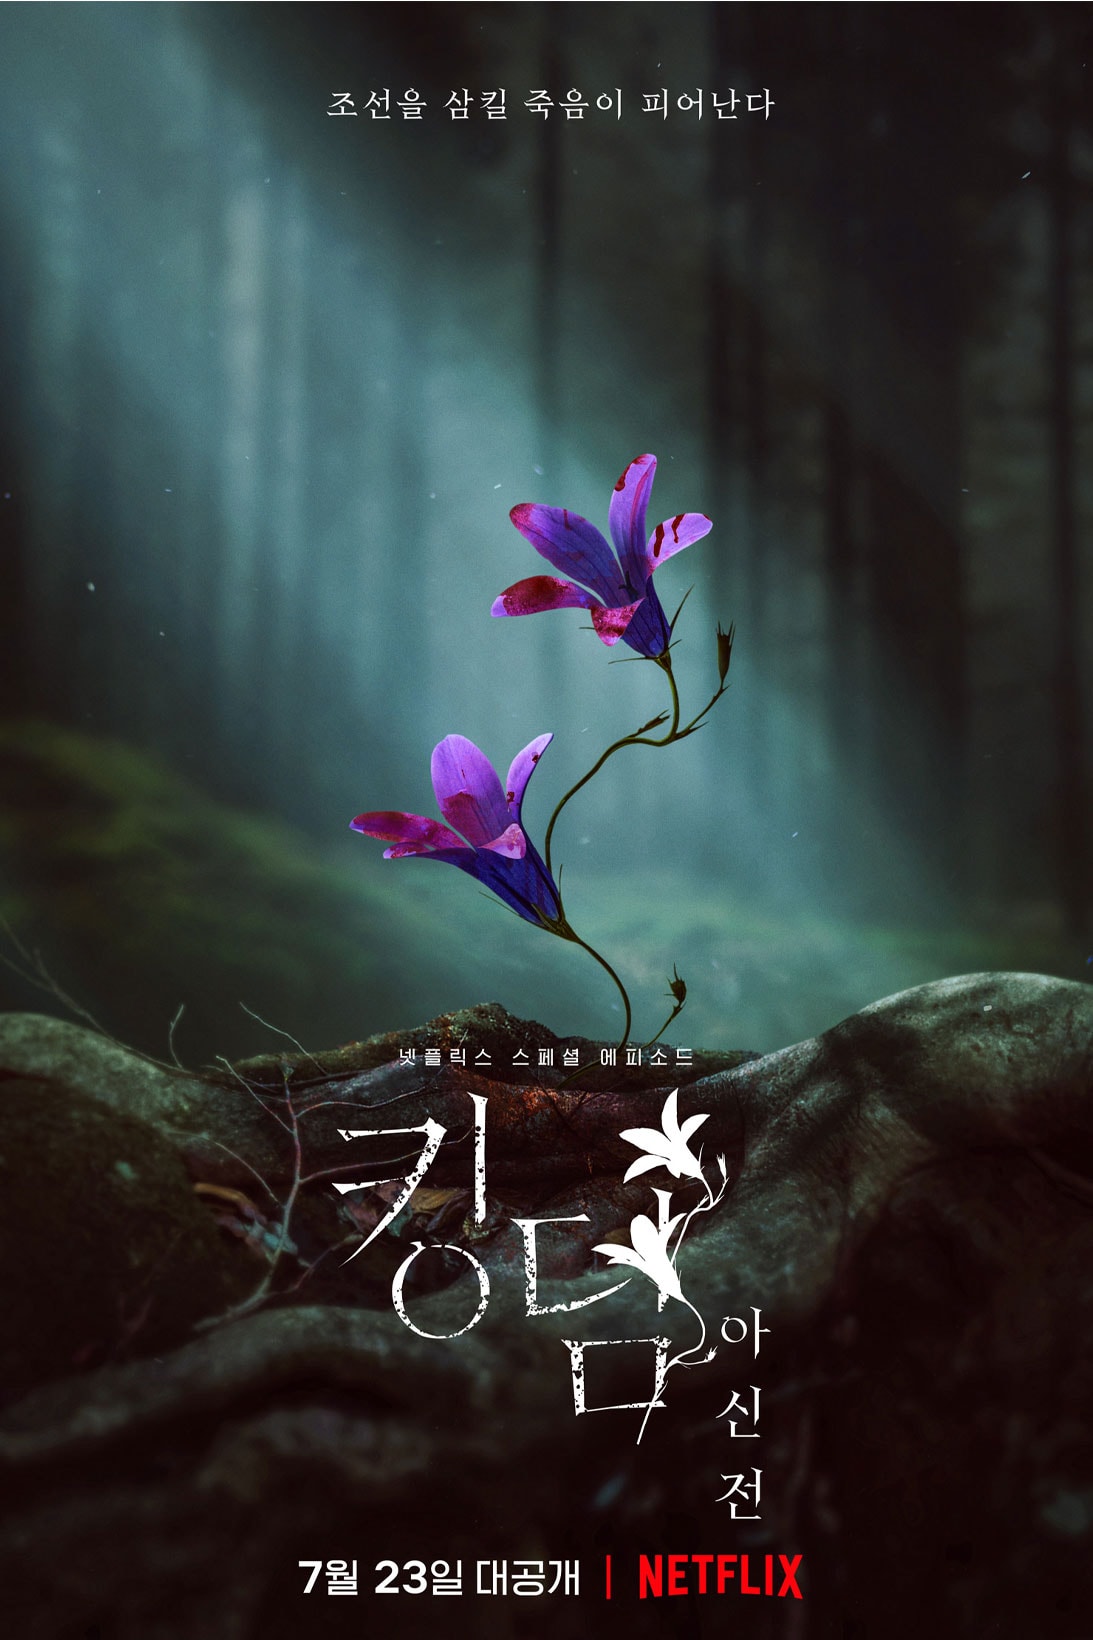 netflix kingdom ashin of the north k-drama zombie special episode poster flowers